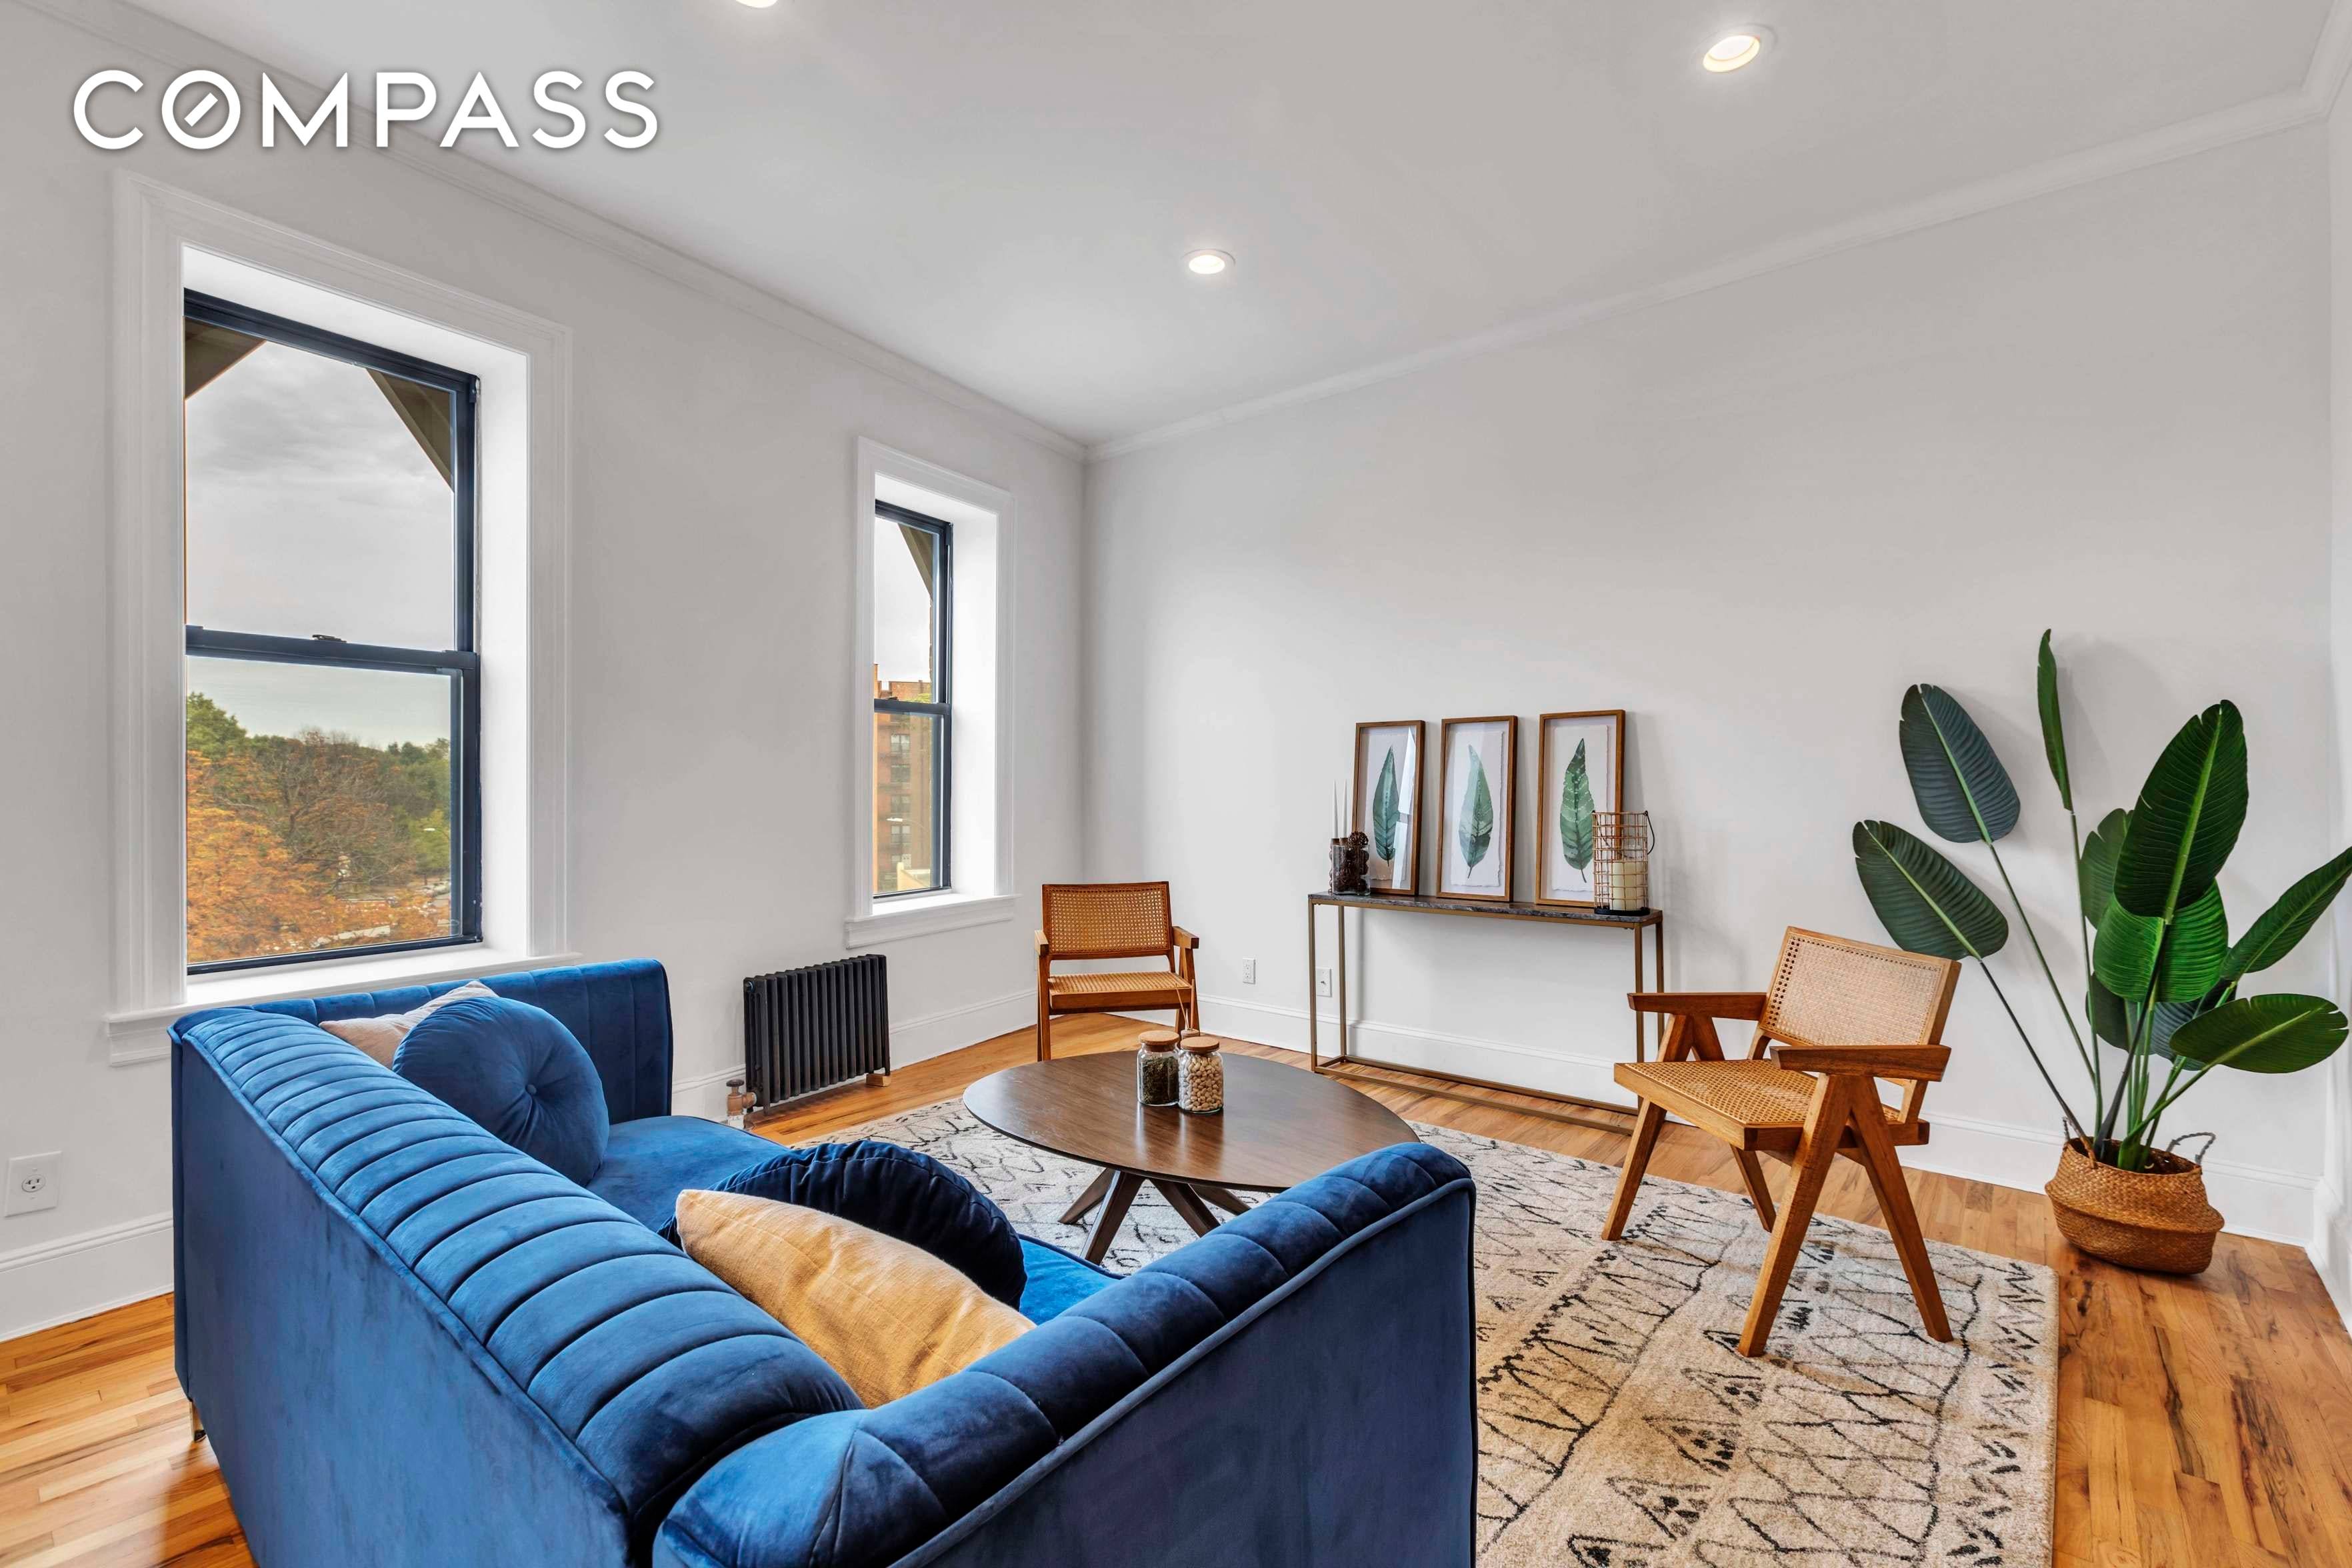 200 Prospect Park West is a classic pre war building in Park Slope that has been fully reimagined and completely renovated for modern living.